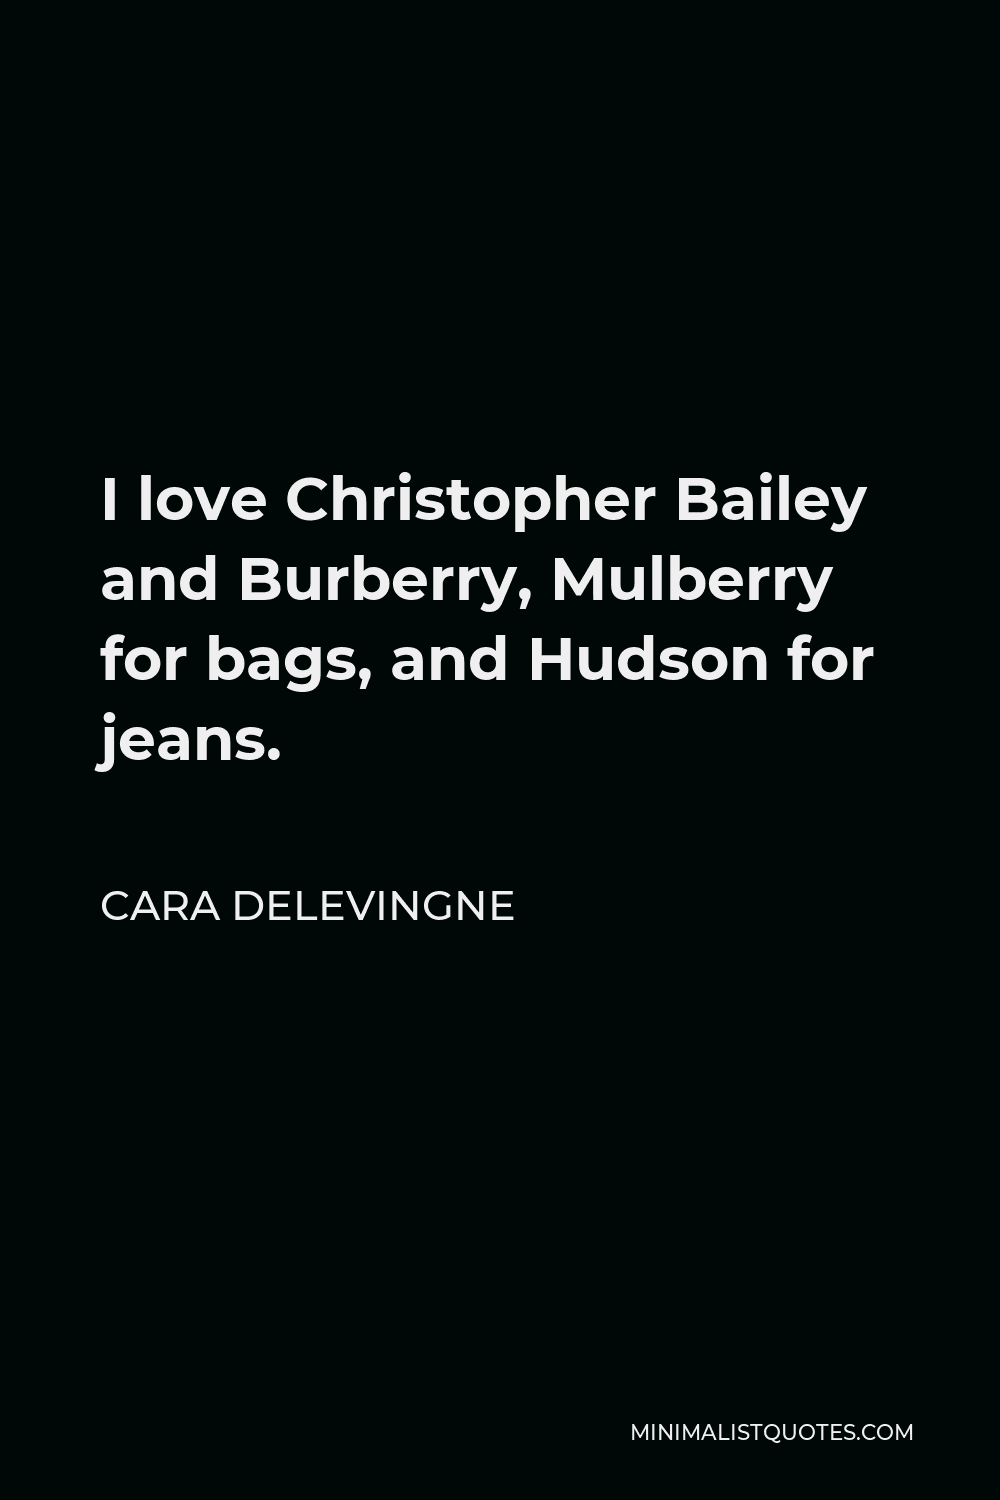 Cara Delevingne Quote - I love Christopher Bailey and Burberry, Mulberry for bags, and Hudson for jeans.